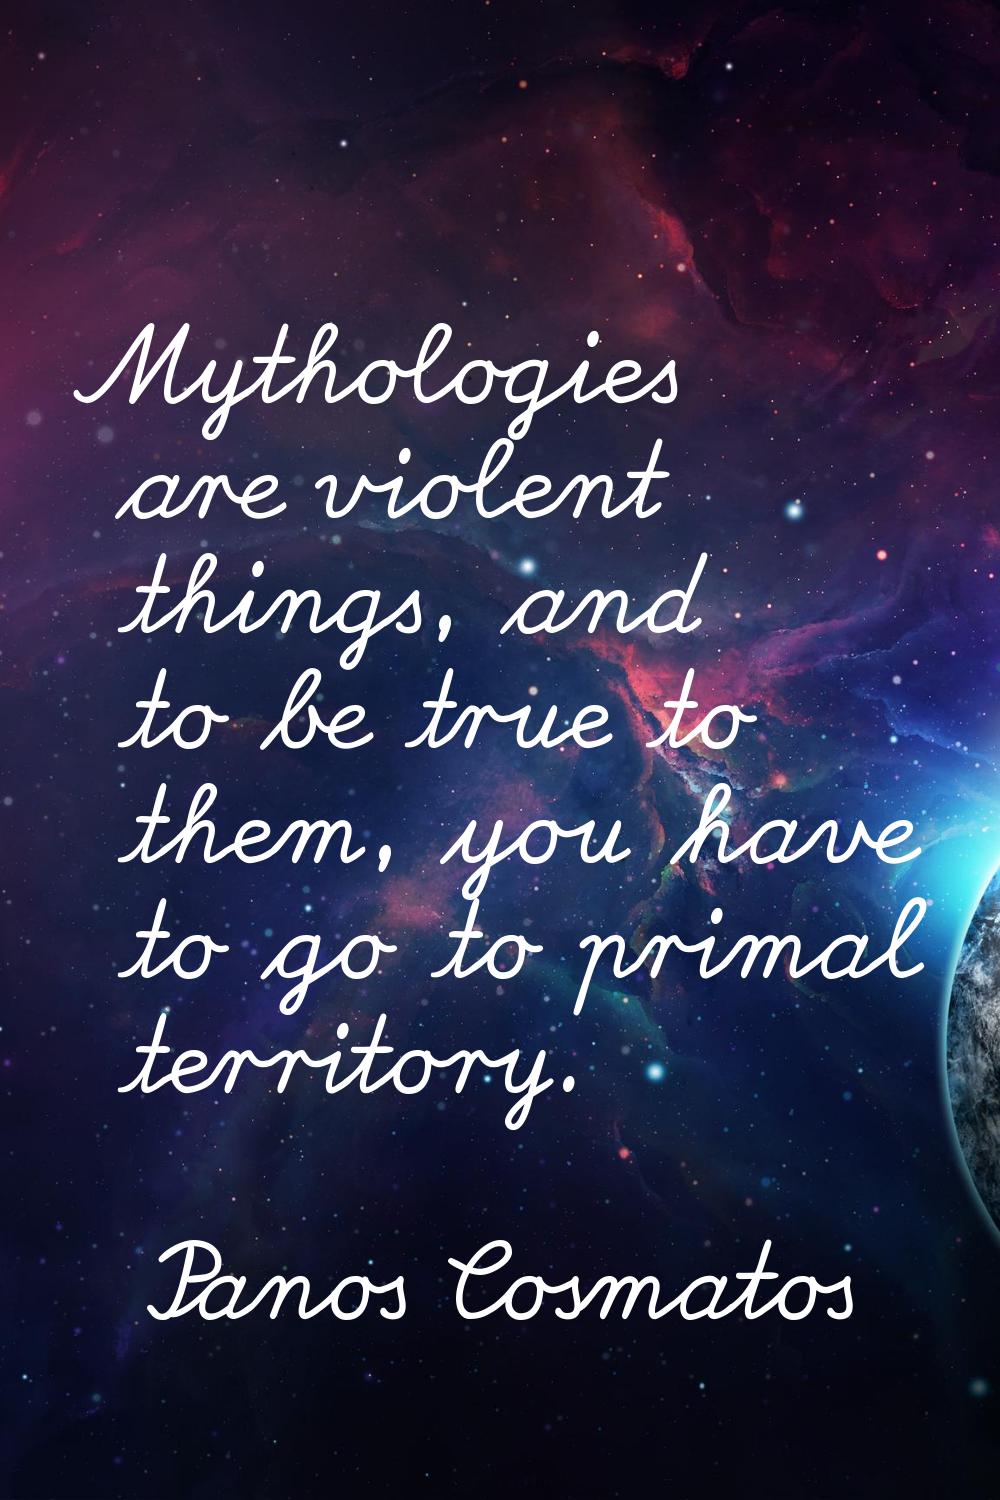 Mythologies are violent things, and to be true to them, you have to go to primal territory.